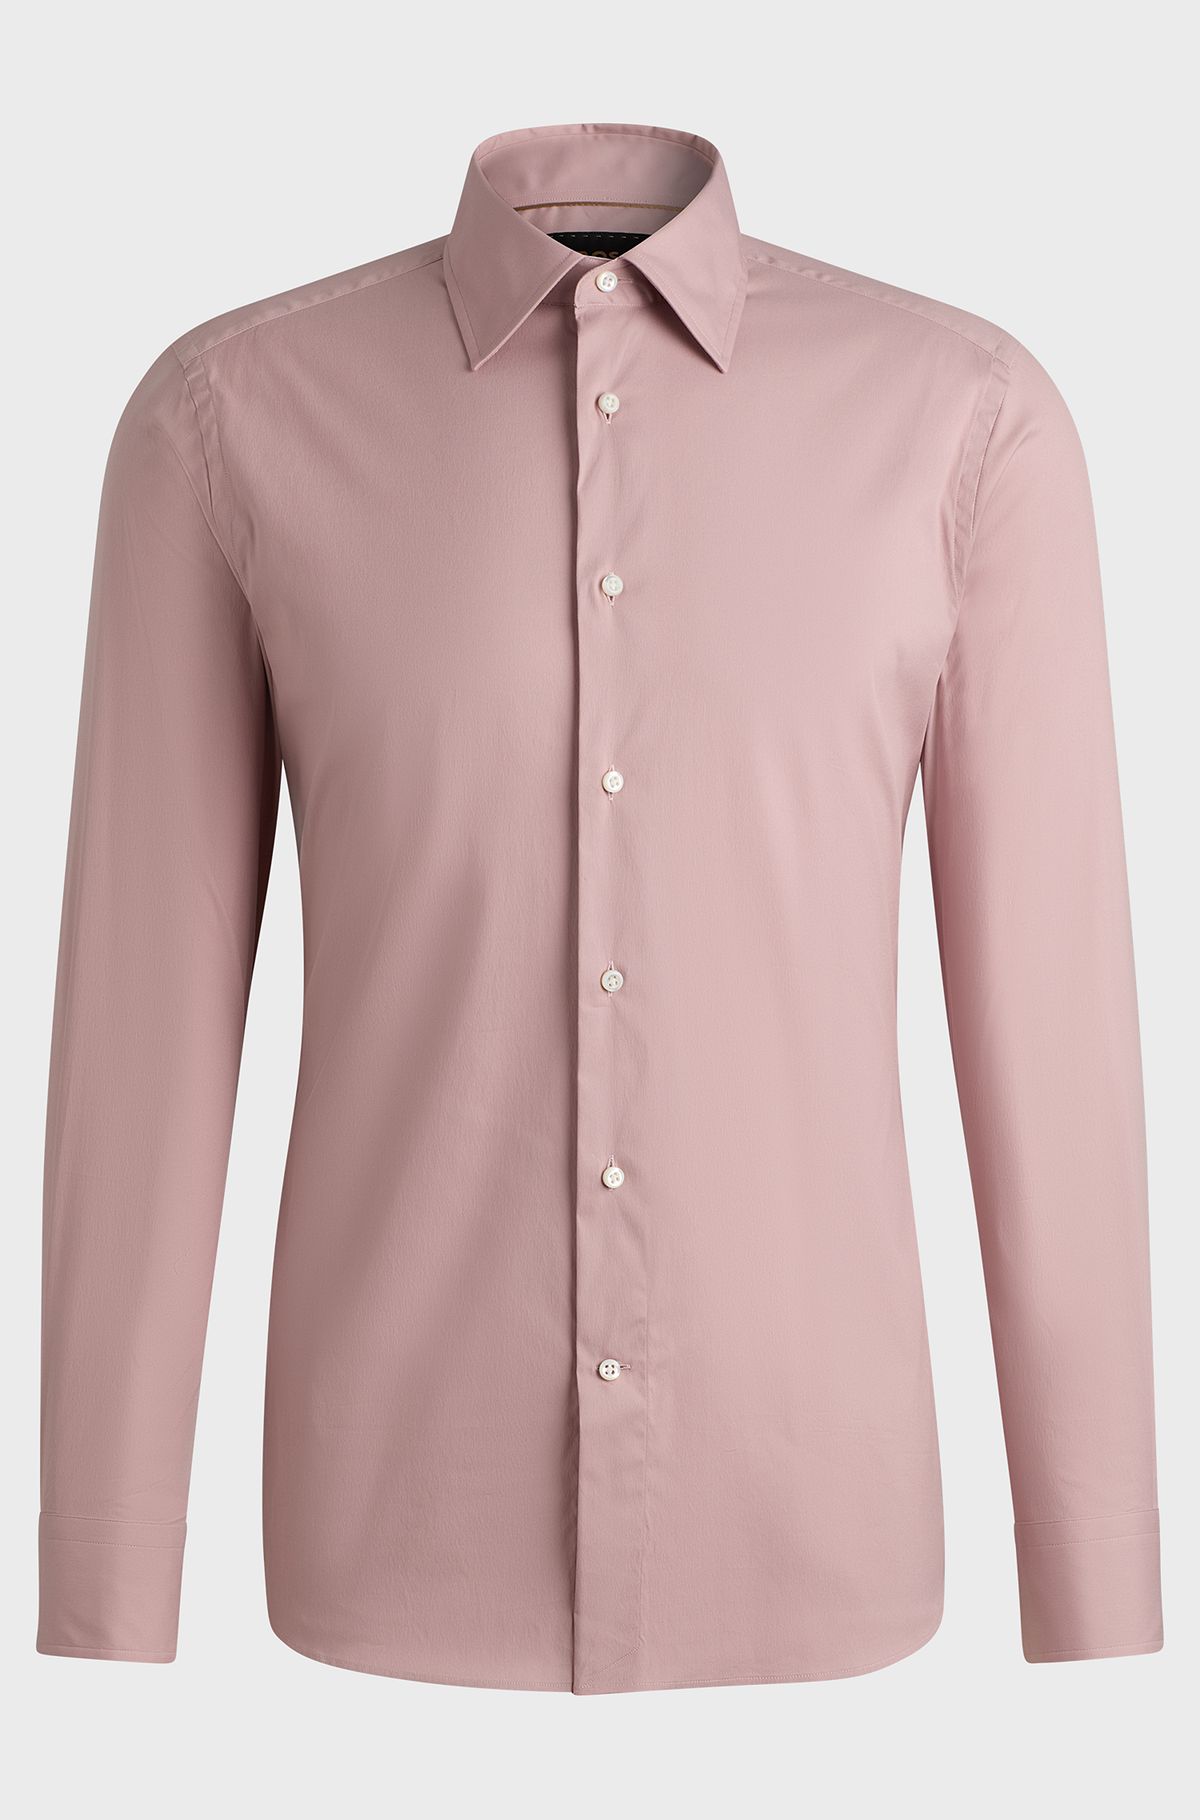 Slim-fit shirt in a stretch-cotton blend, light pink